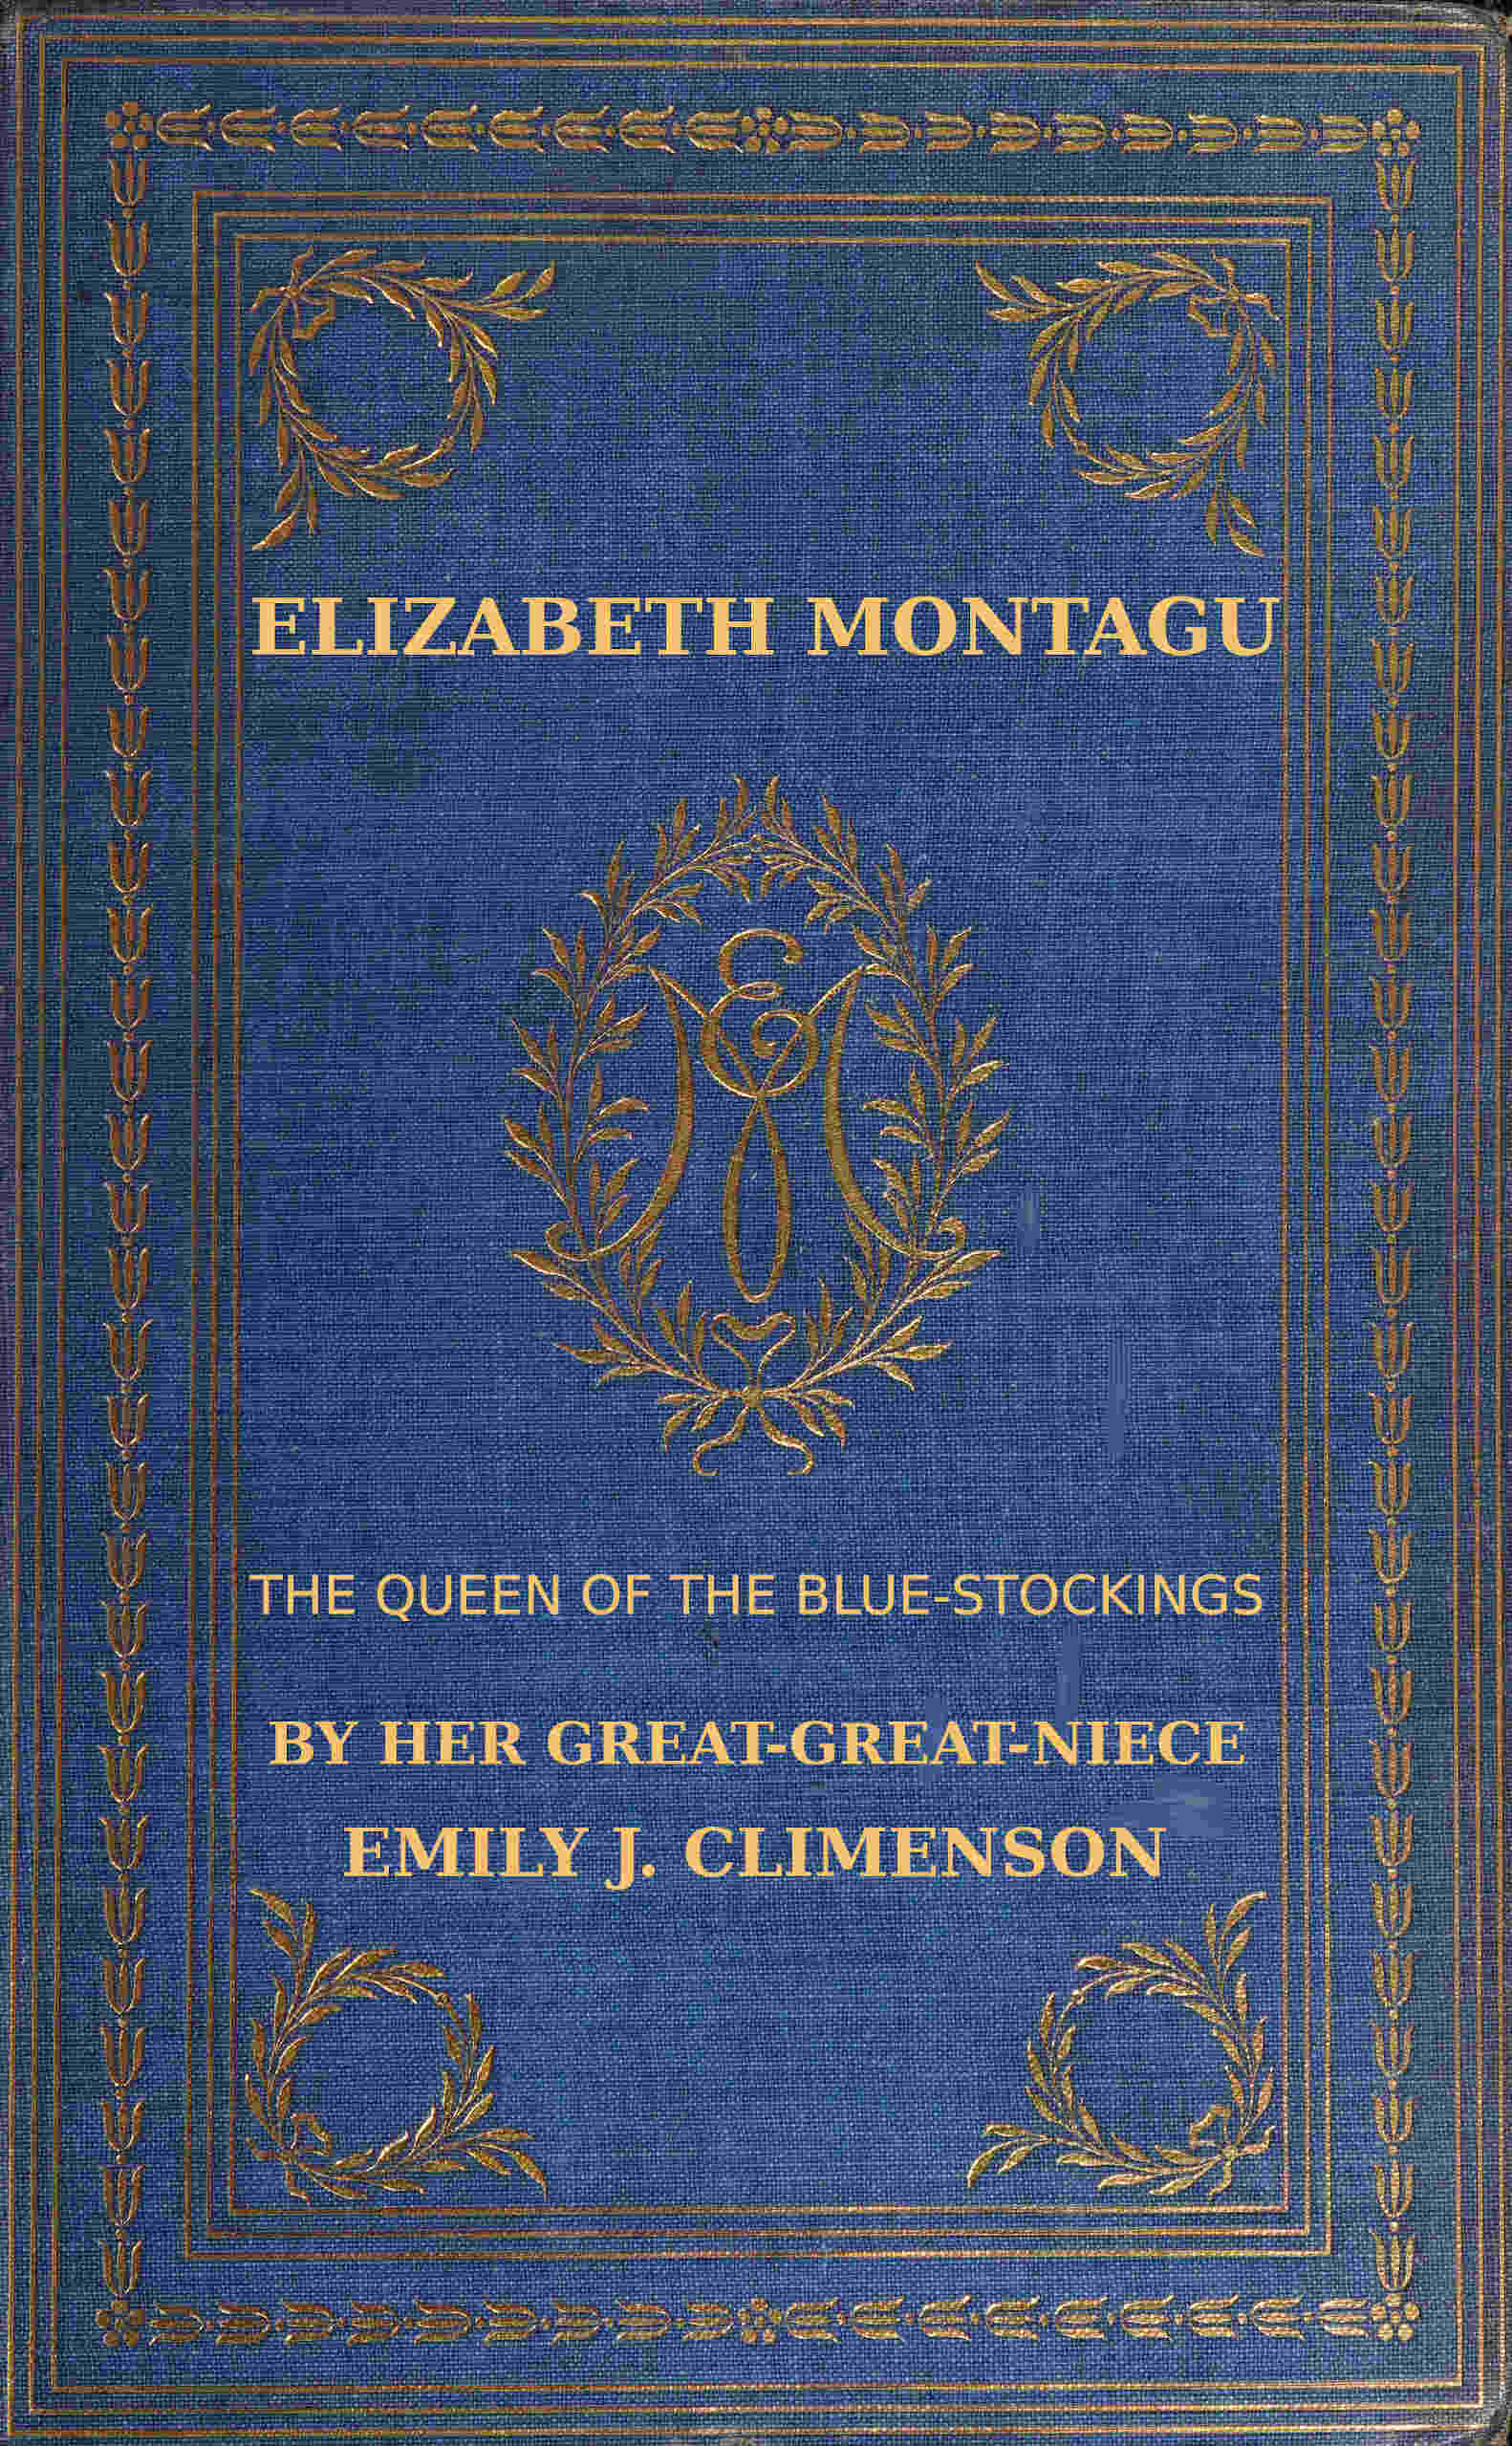 Elizabeth Montagu, the queen of the bluestockings, Volumes 1 and 2